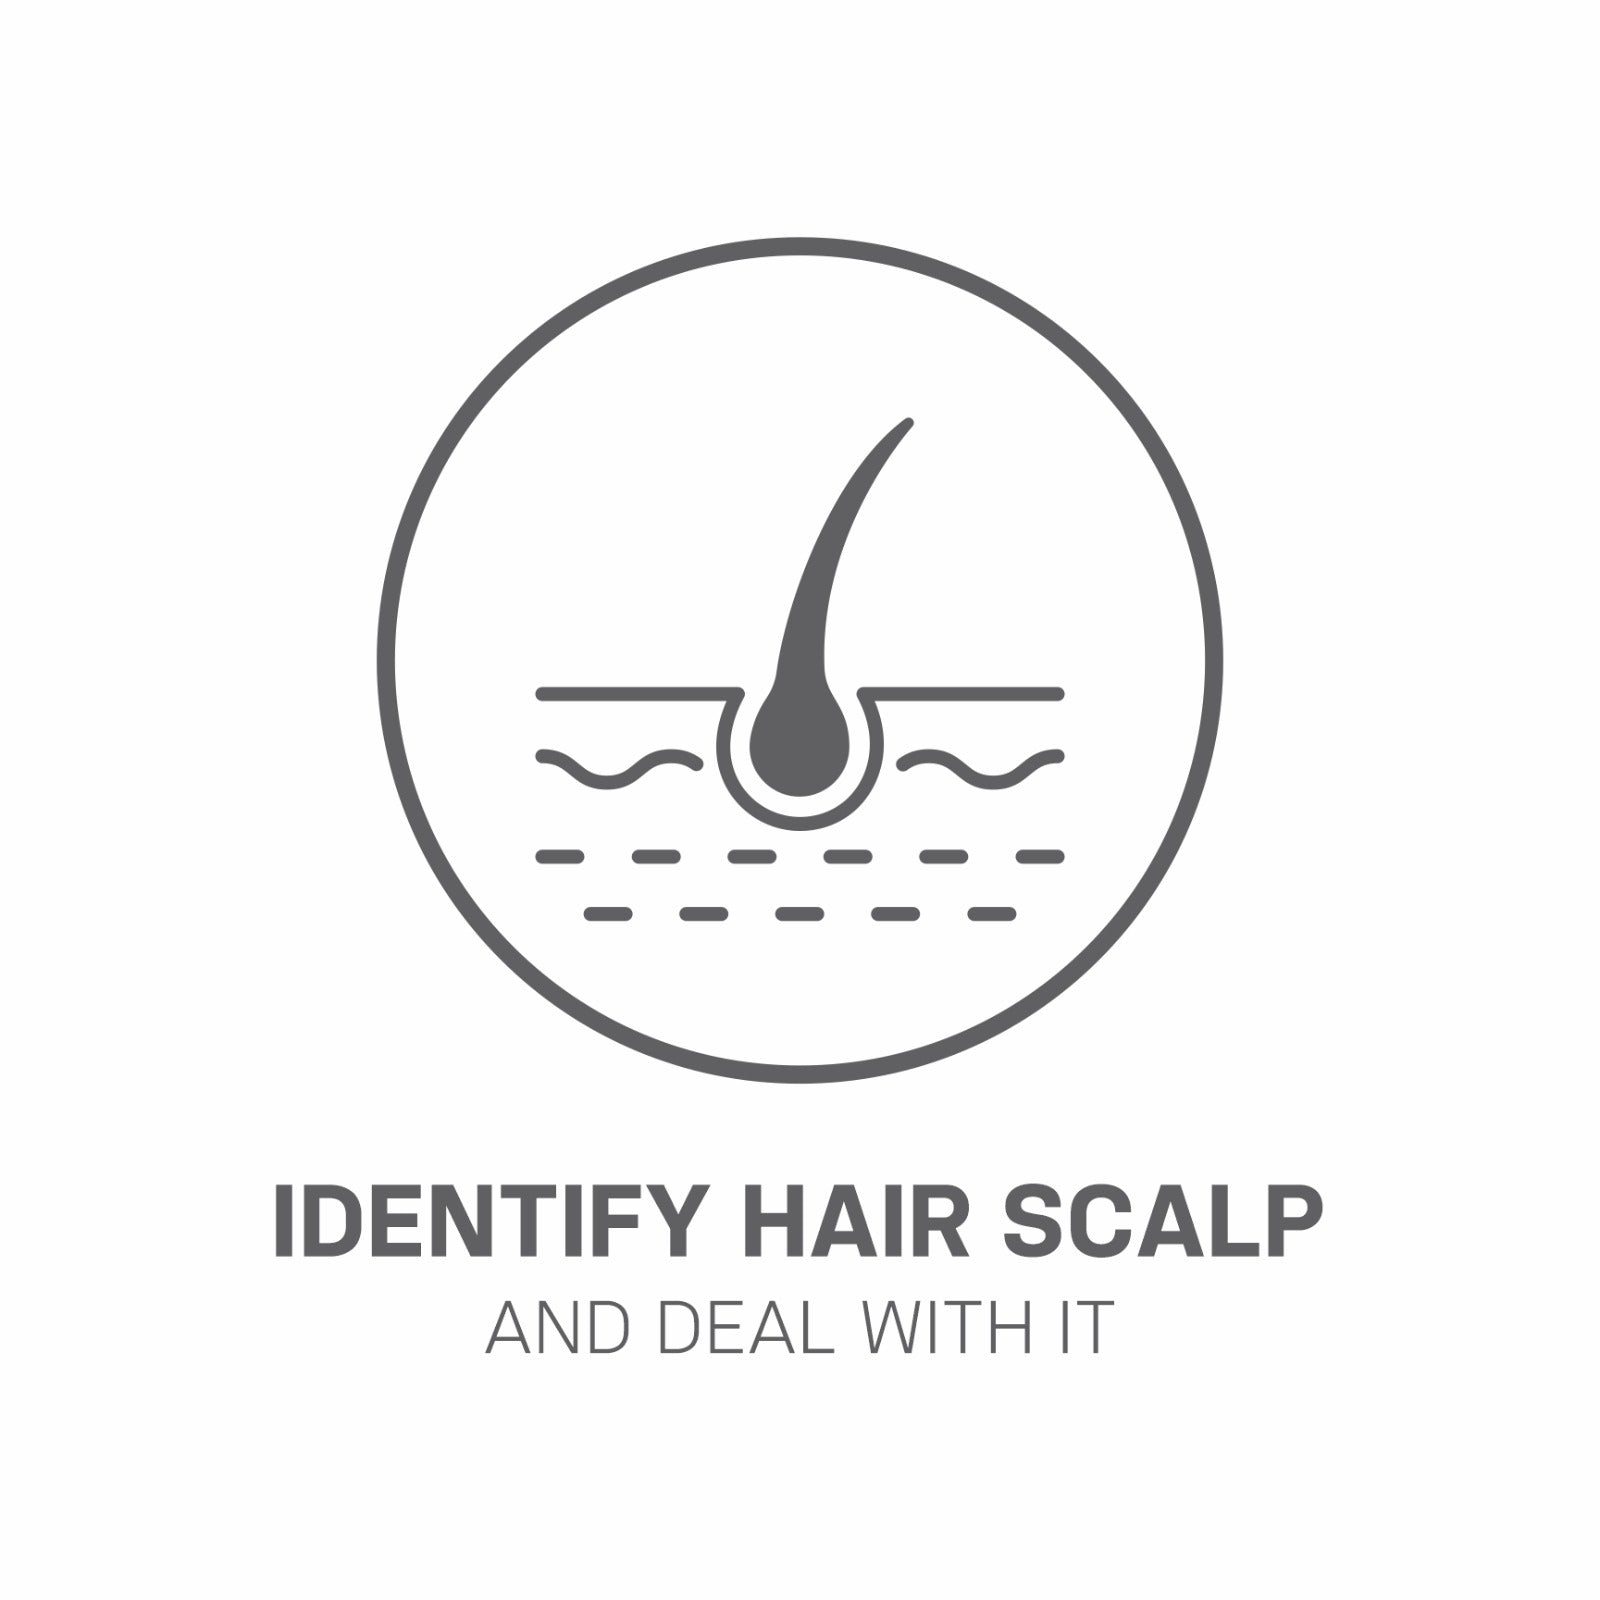 How to Identify hair scalp